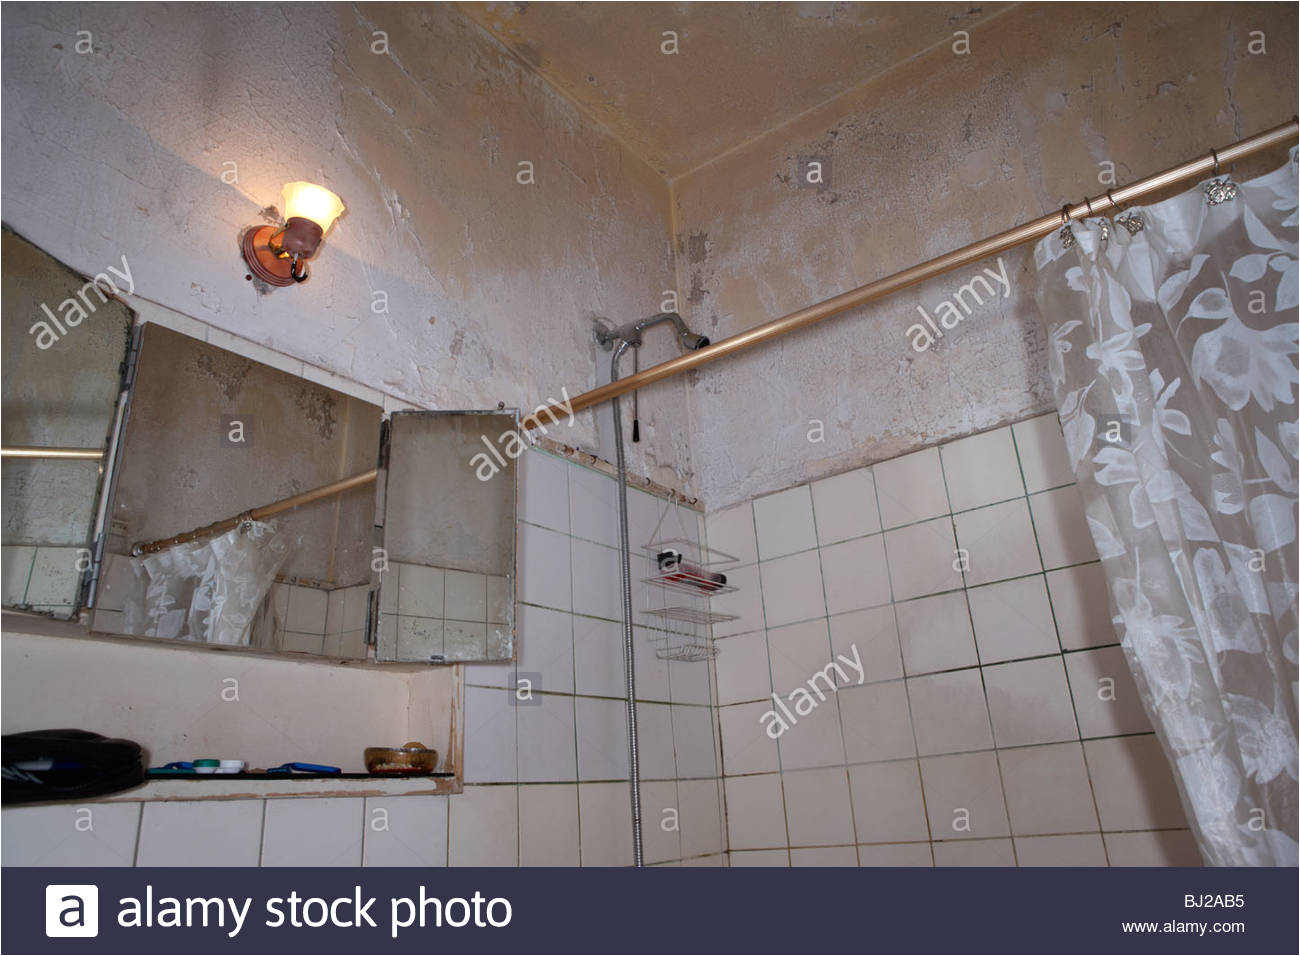 stock photo peeling paint on the ceiling above the shower in a run down bathroom